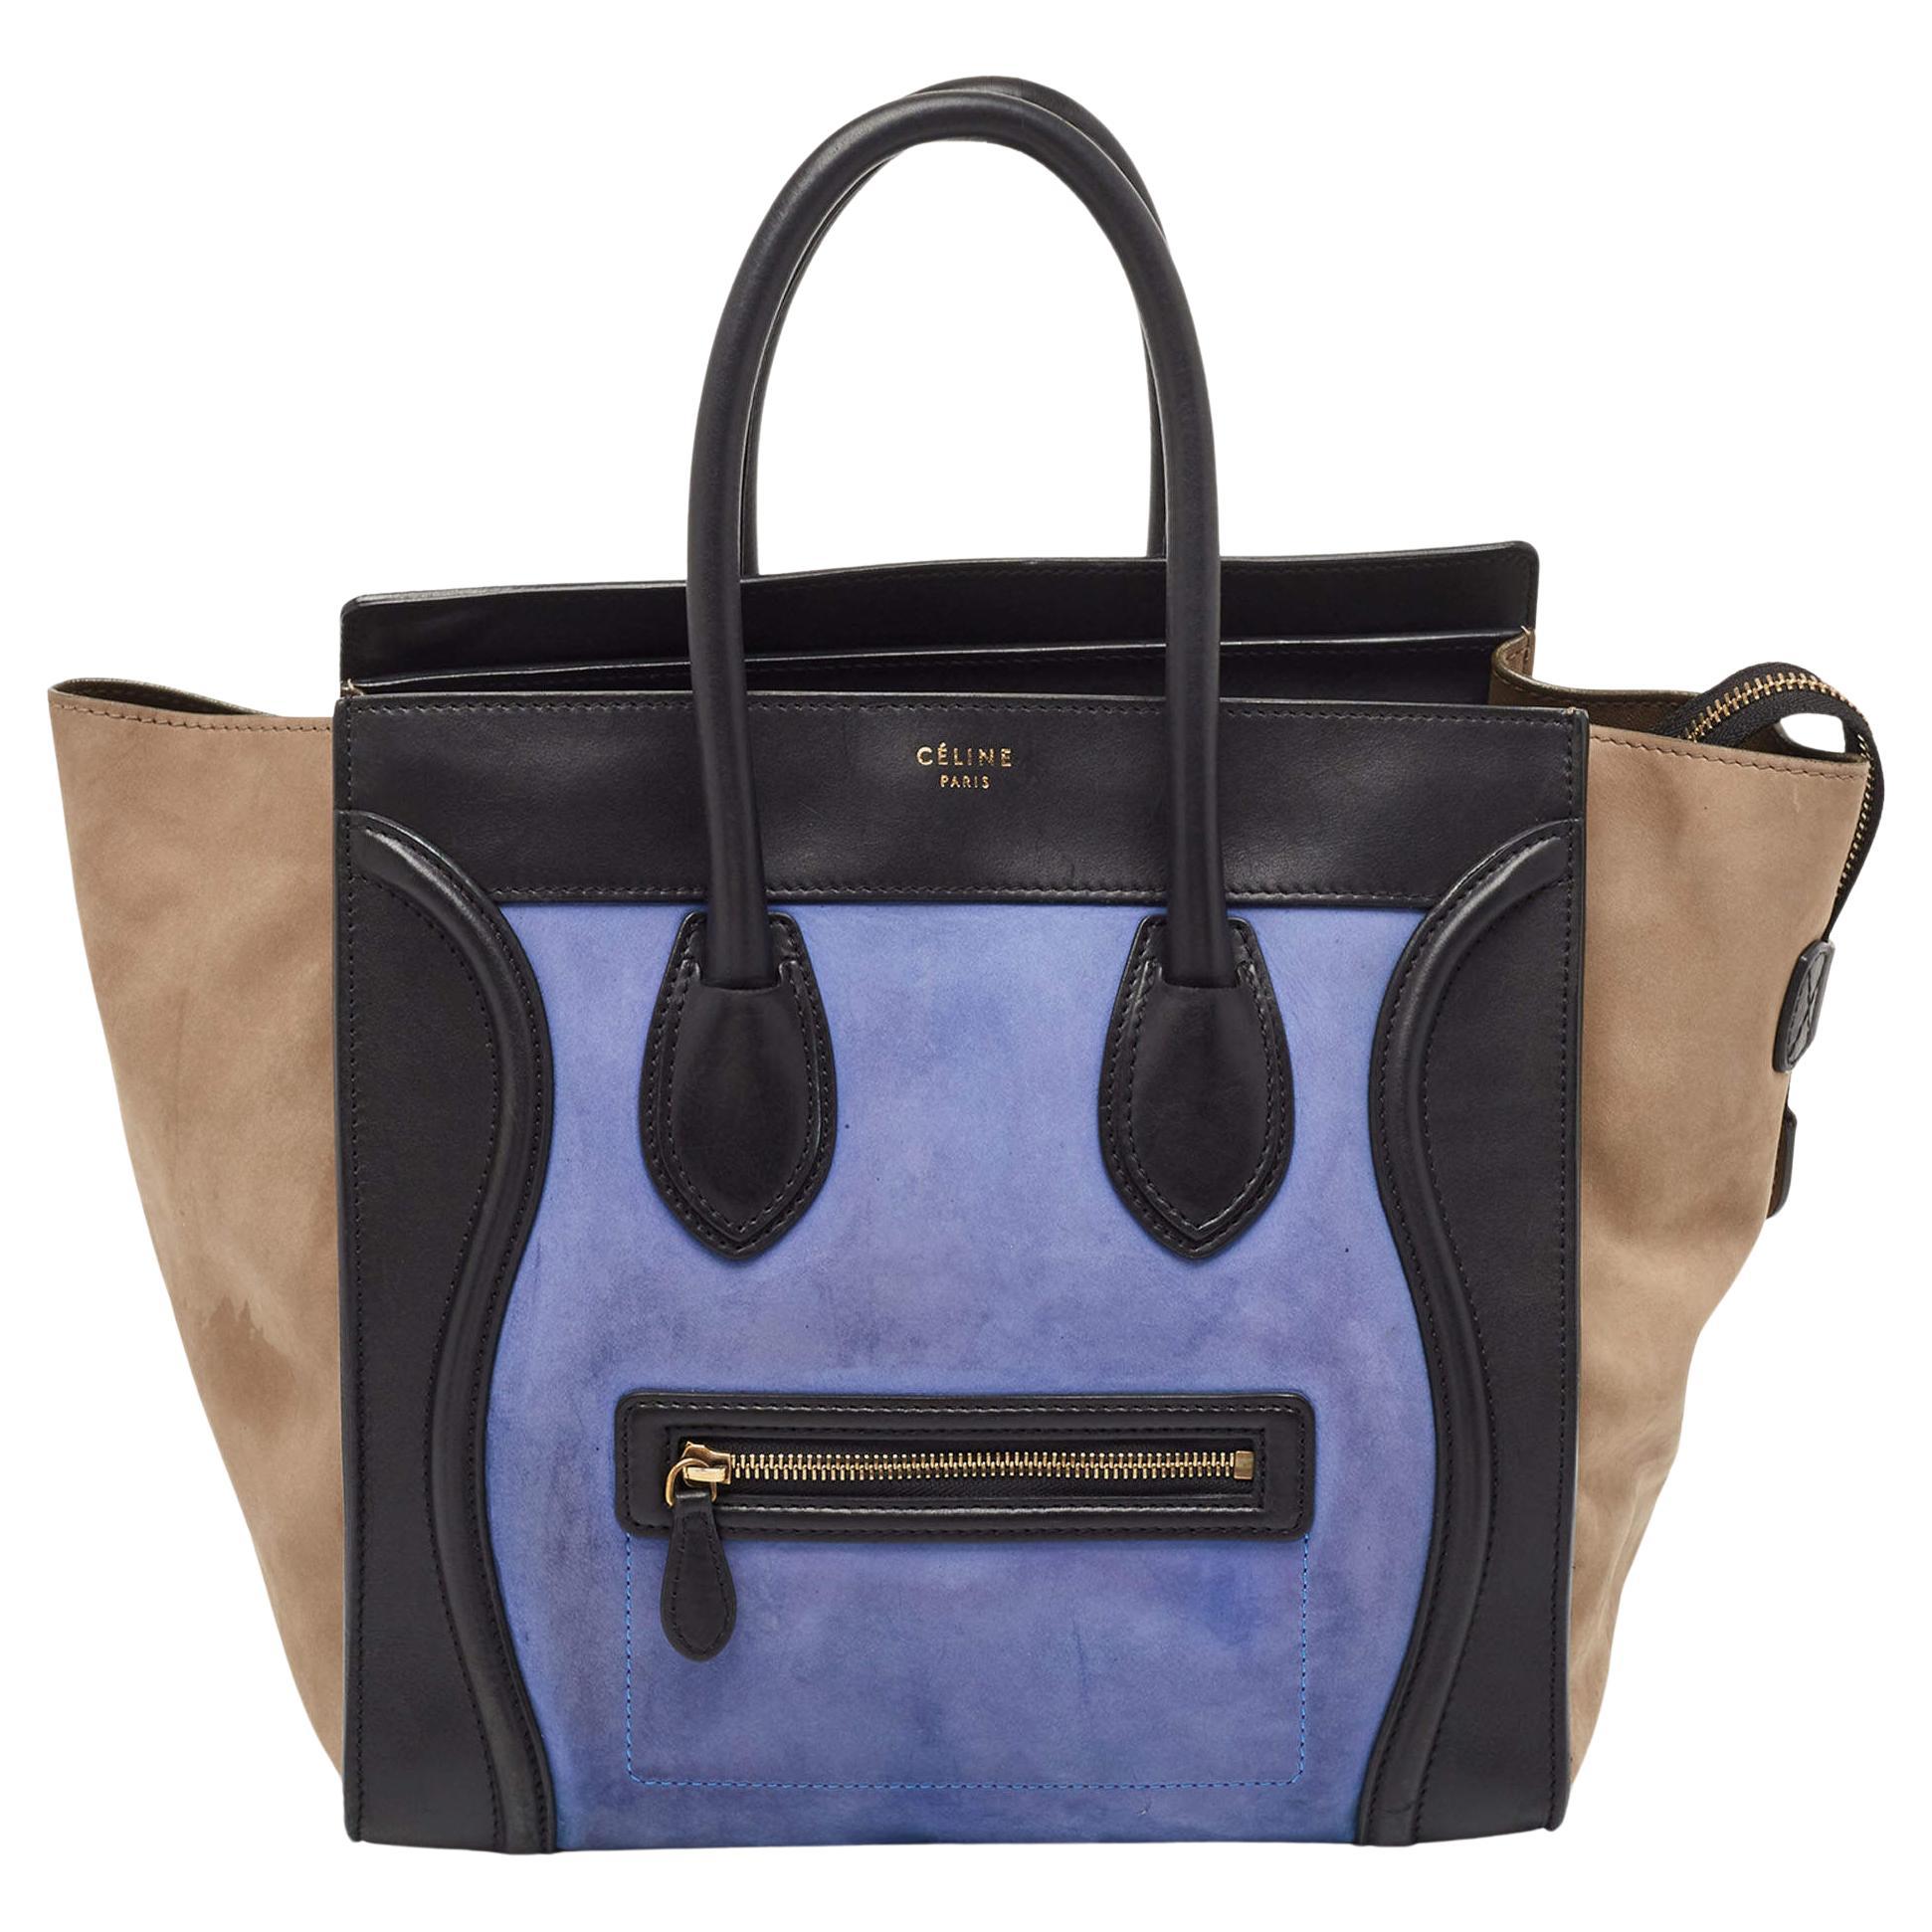 Celine Tricolor Leather and Nubuck Mini Luggage Tote For Sale